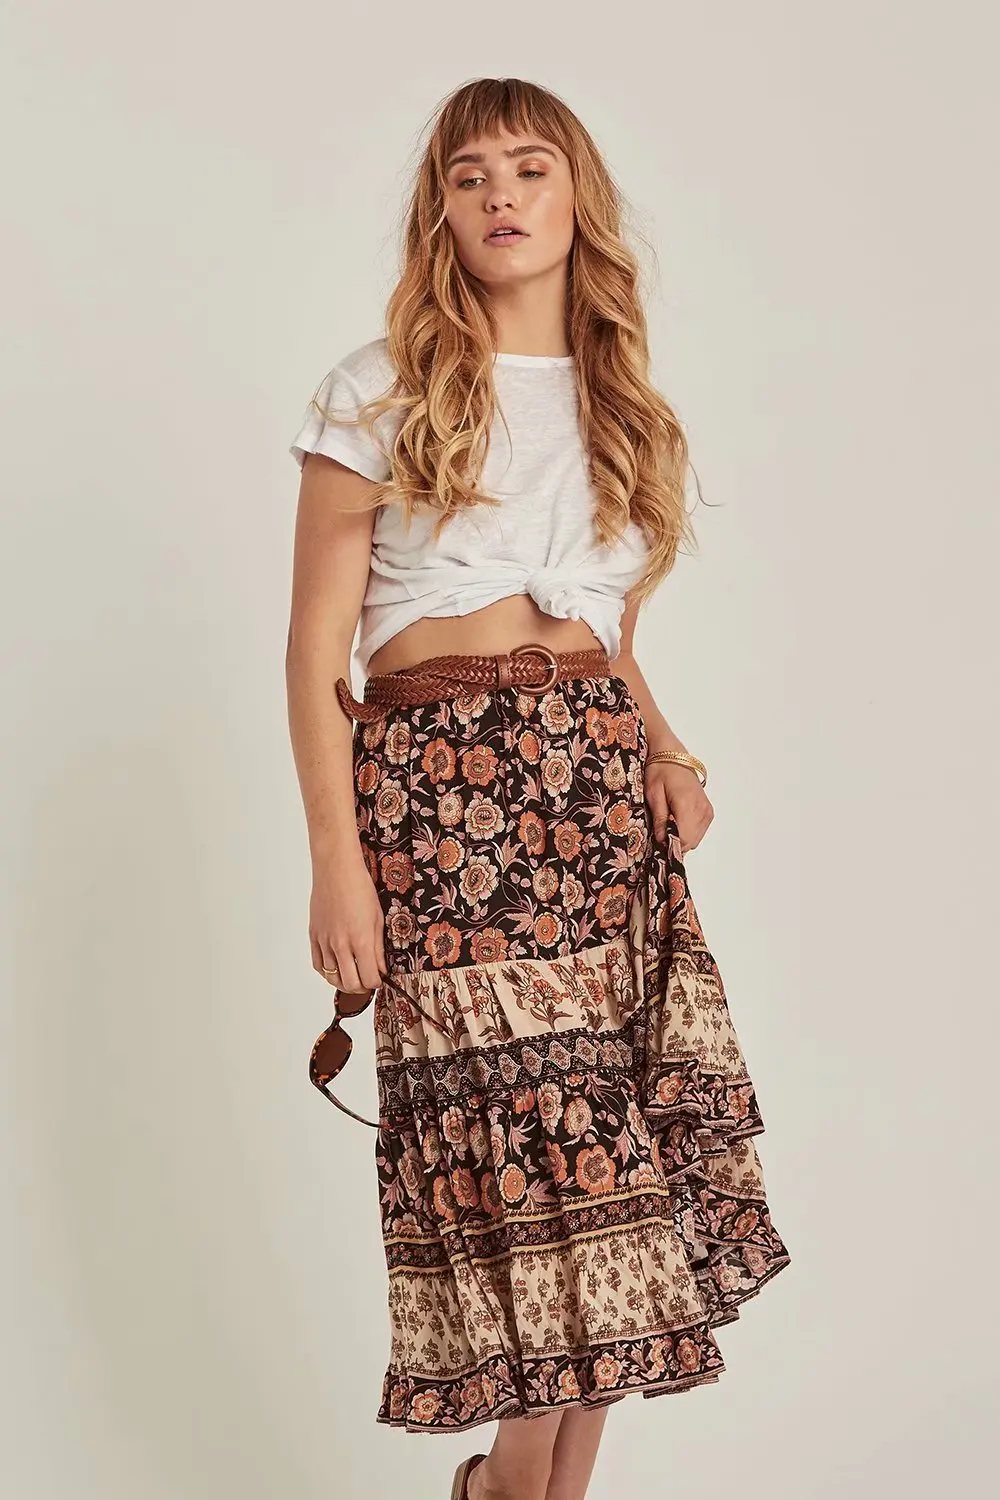 

WOMEN'S Dress 2019 Spring And Summer New Style Fashion High-waisted Lotus Leaf Lace-up Joint Printed Goddess Elegant Skirt Women